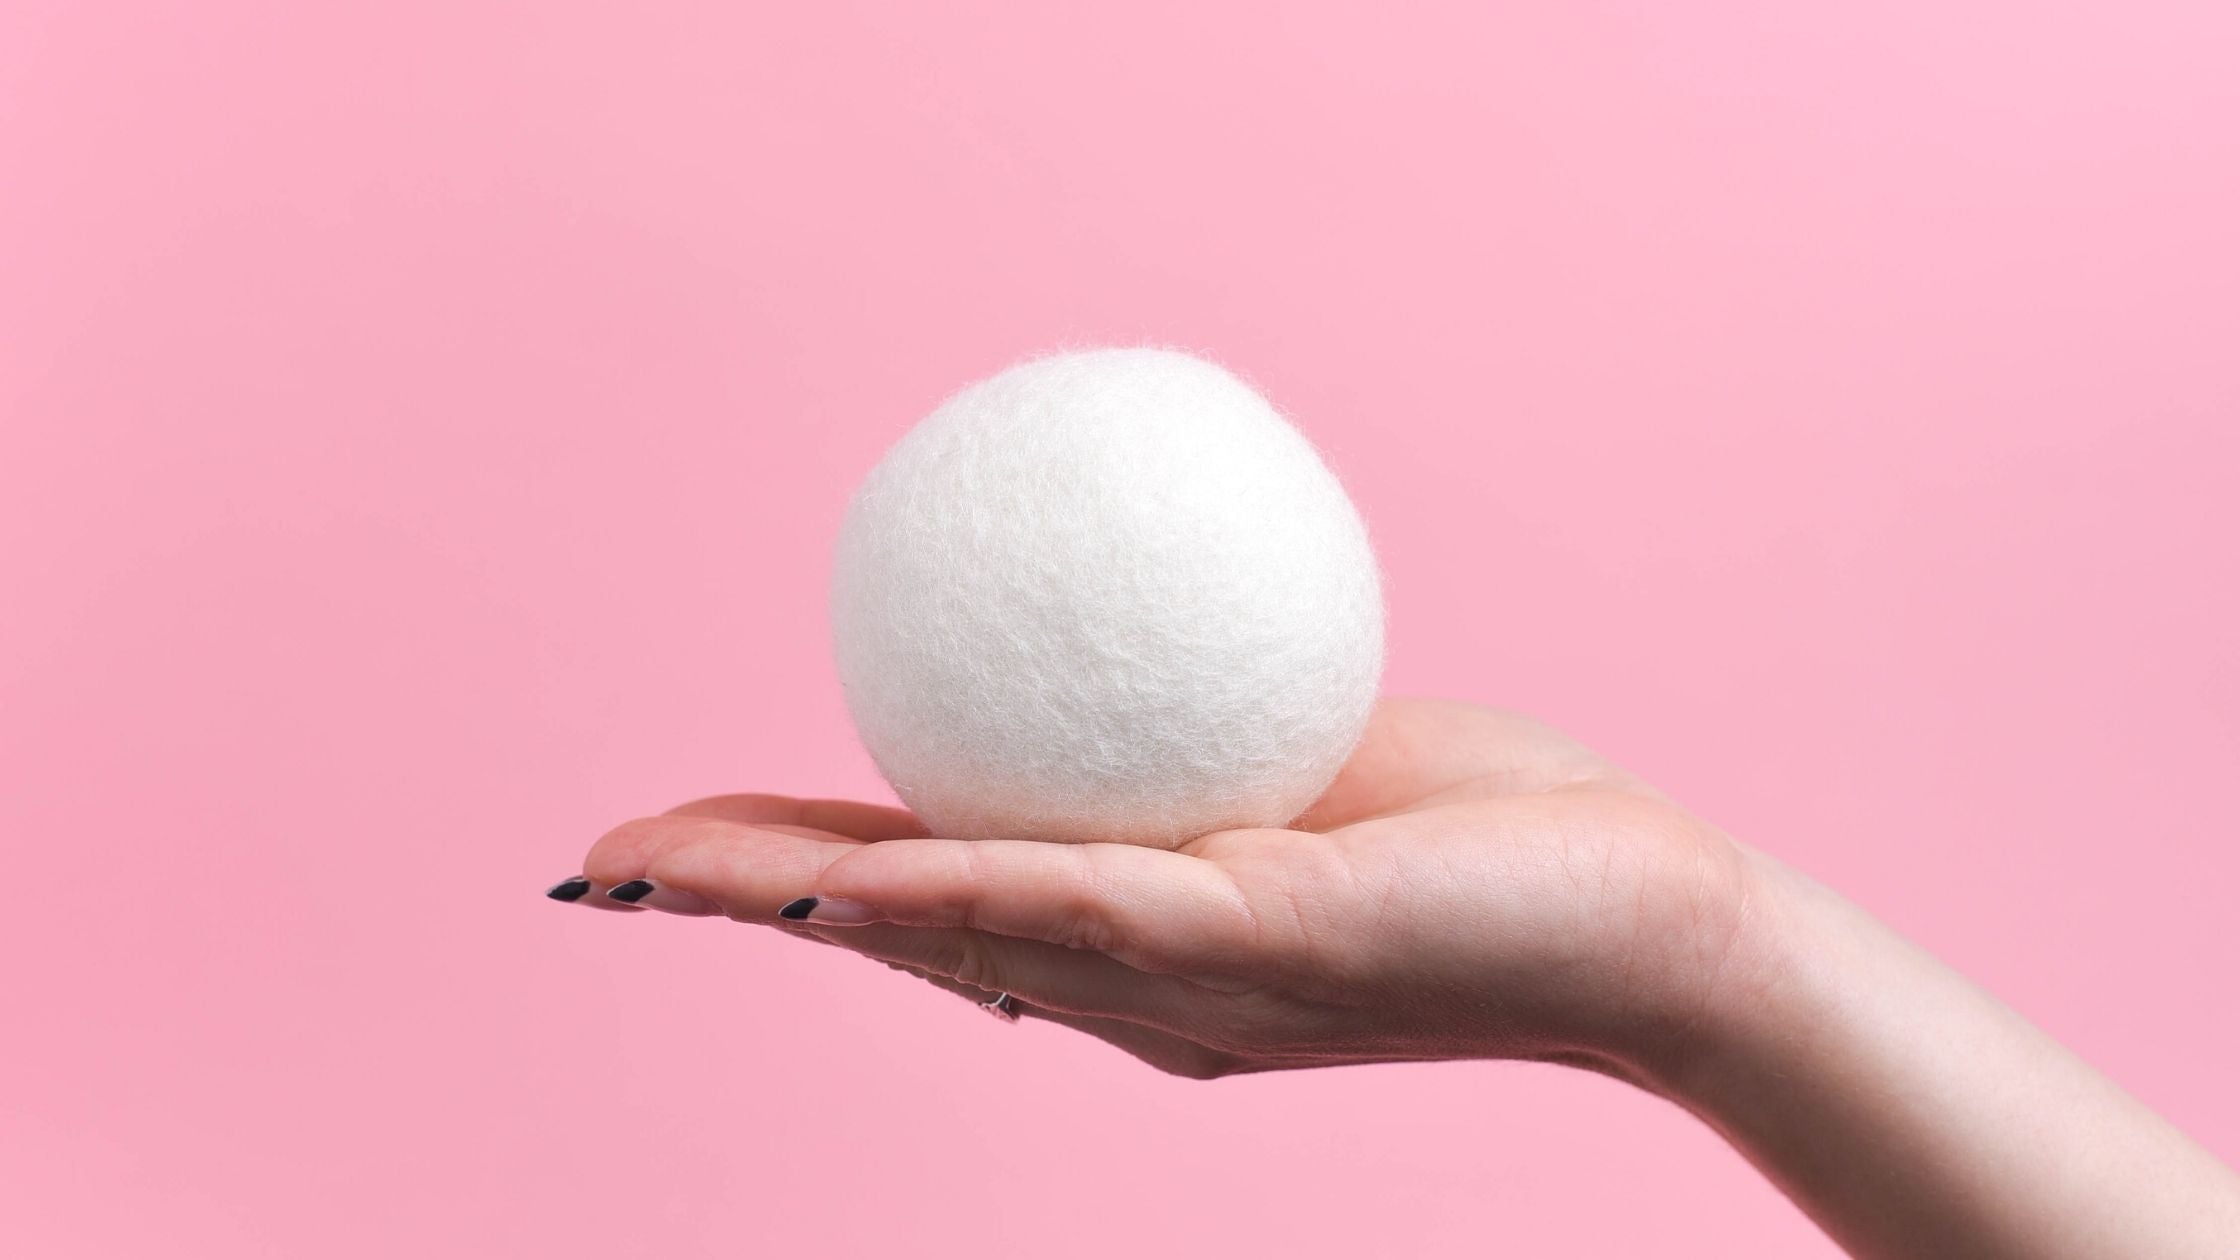 How and Why We Use Wool Dryer Balls [Everything You Need to Know